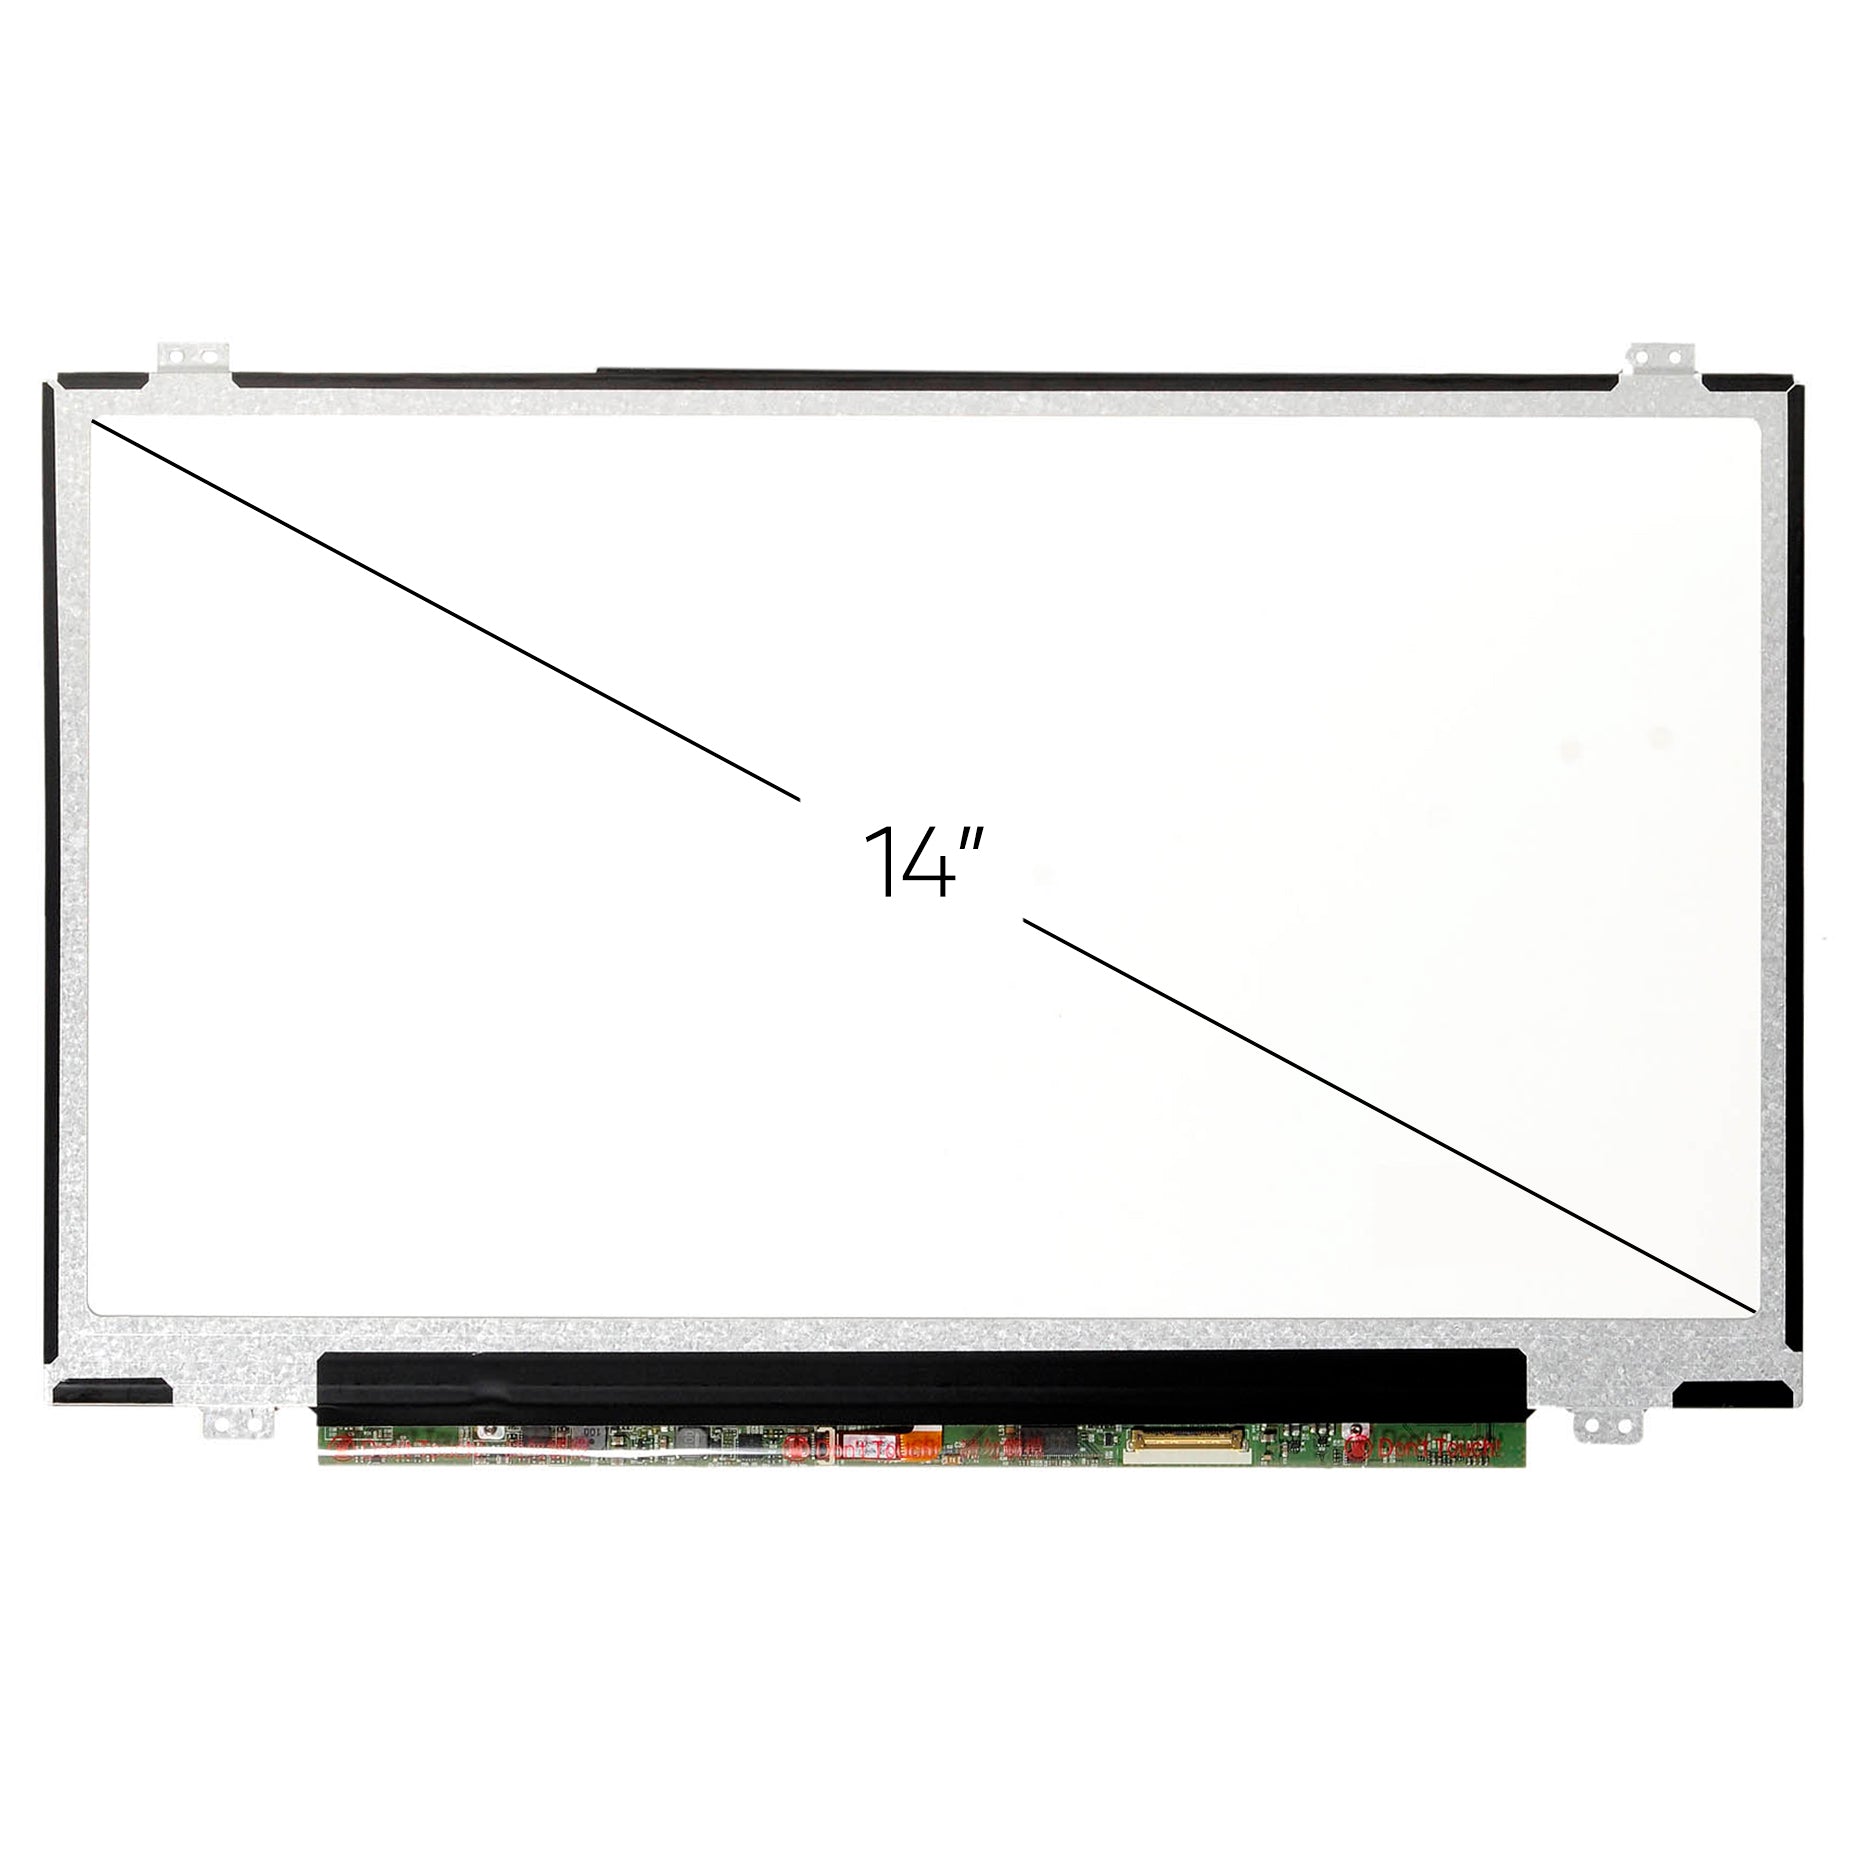 Screen Replacement for LP140WF1(SP)(J1) FHD 1920x1080 IPS Matte LCD LED Display